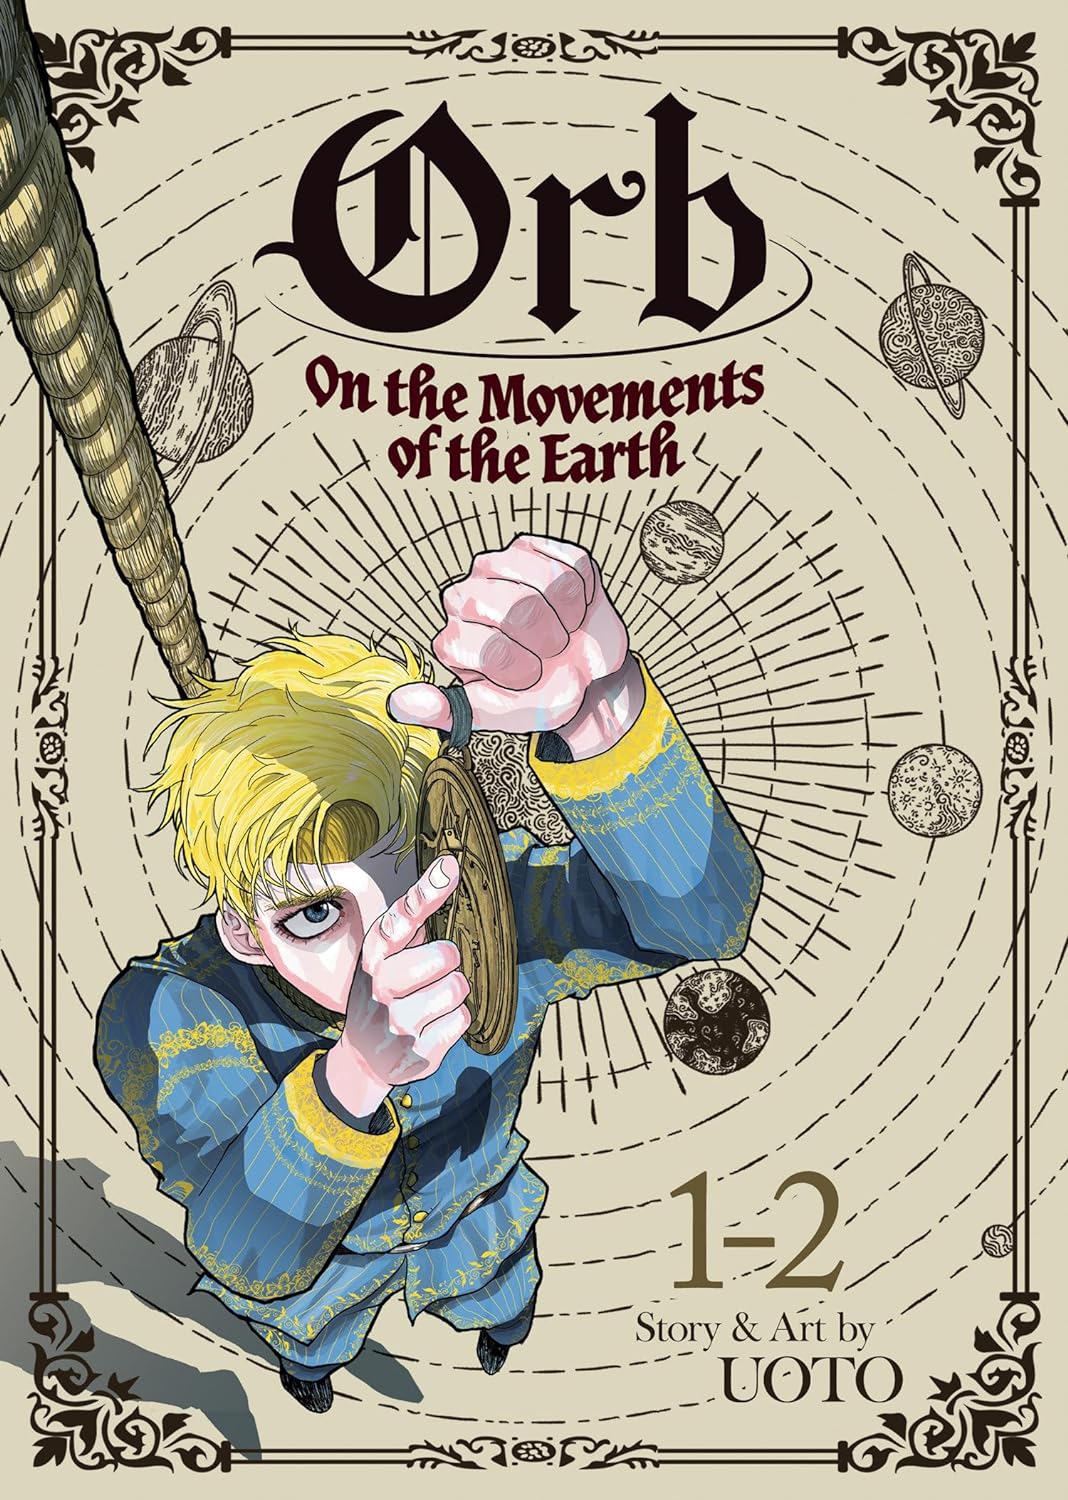 Orb: On the Movements of the Earth (Omnibus) Vol. 01-02